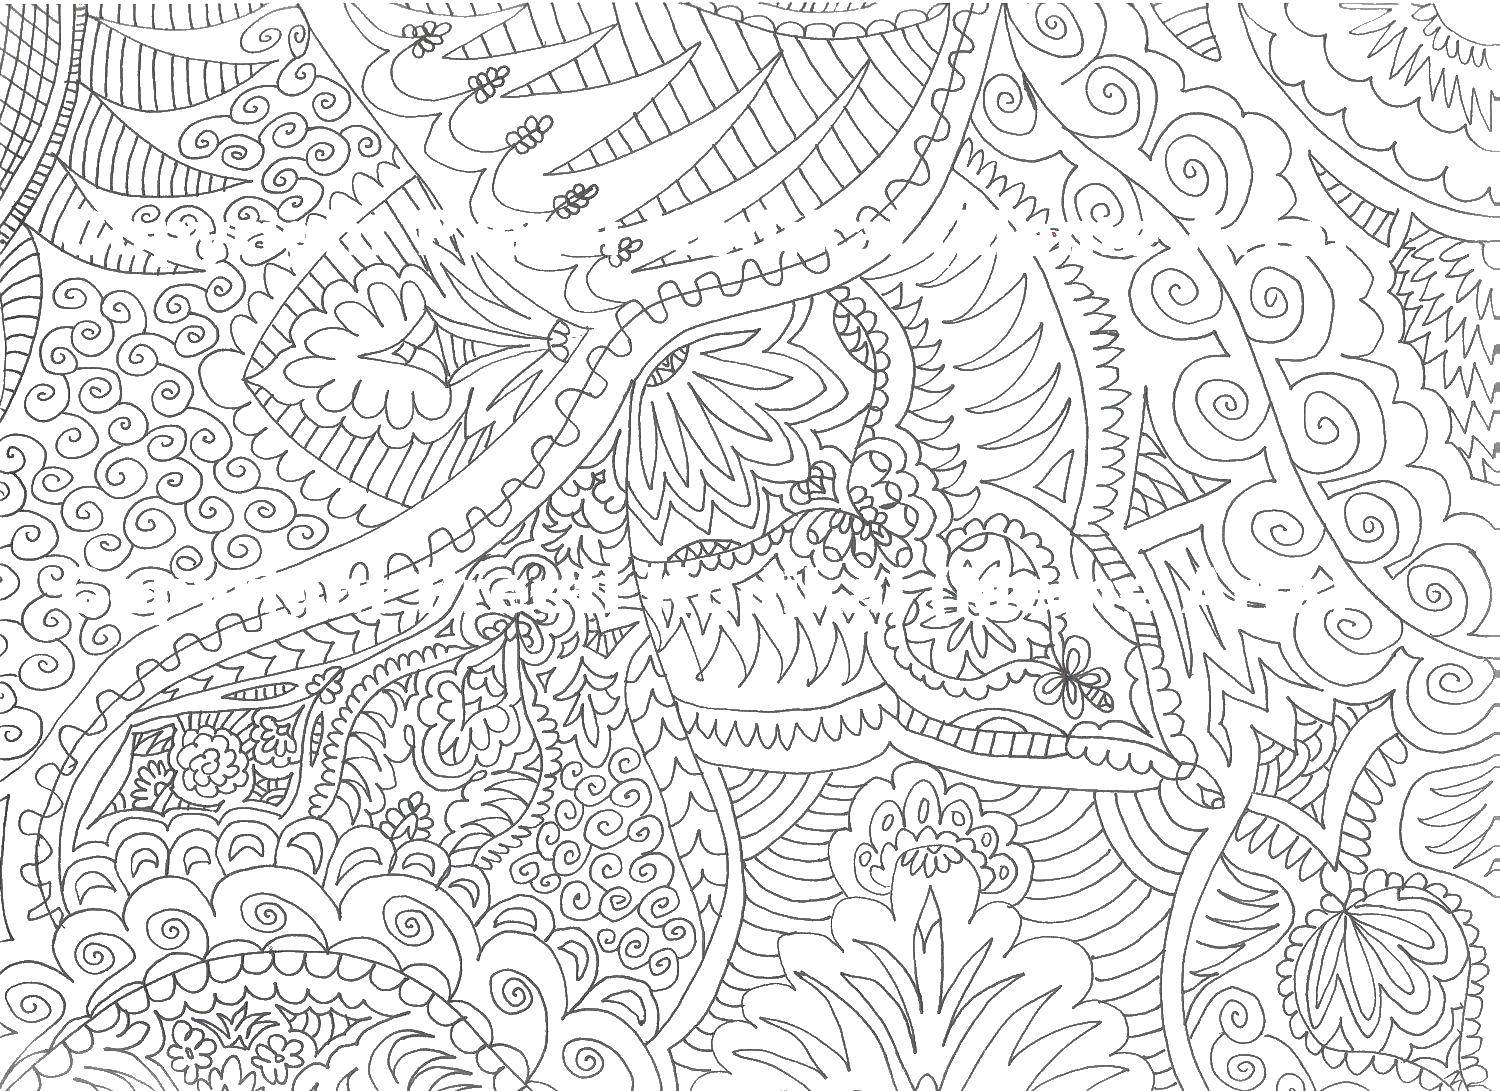 Coloring Flower patterns. Category Patterns with flowers. Tags:  patterns, flowers.